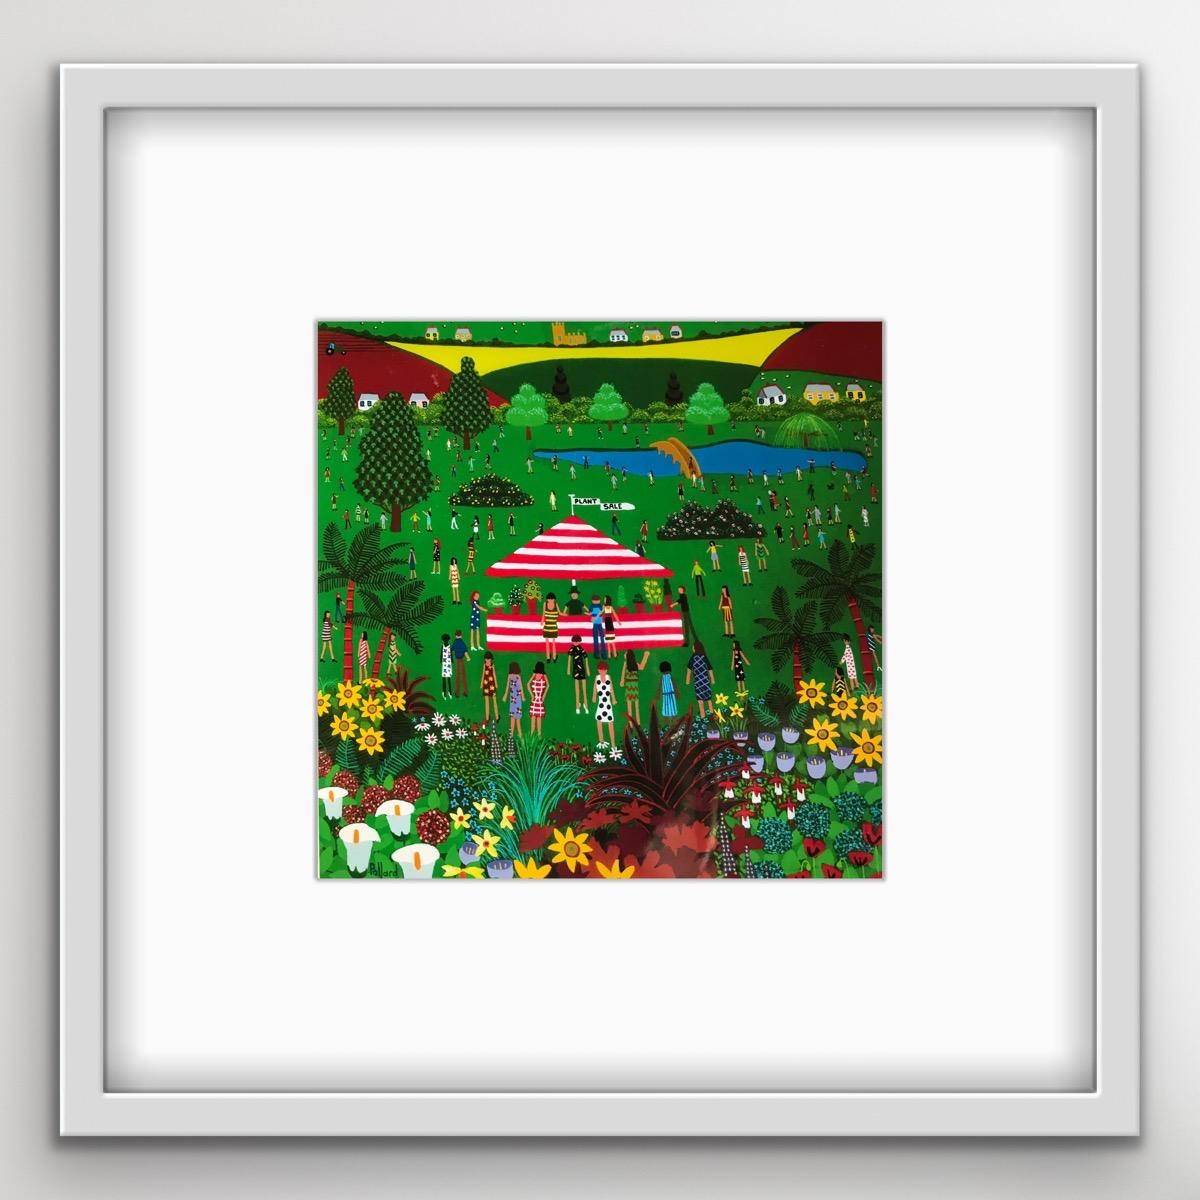 Garden Sale by Brian Pollard is a limited edition giclée print of the scene of a village plant sale. It In the distance, it features emblems of rural life,  such as a lake, bridge and church. It is a vibrant and colourful naïve artwork.

ADDITIONAL